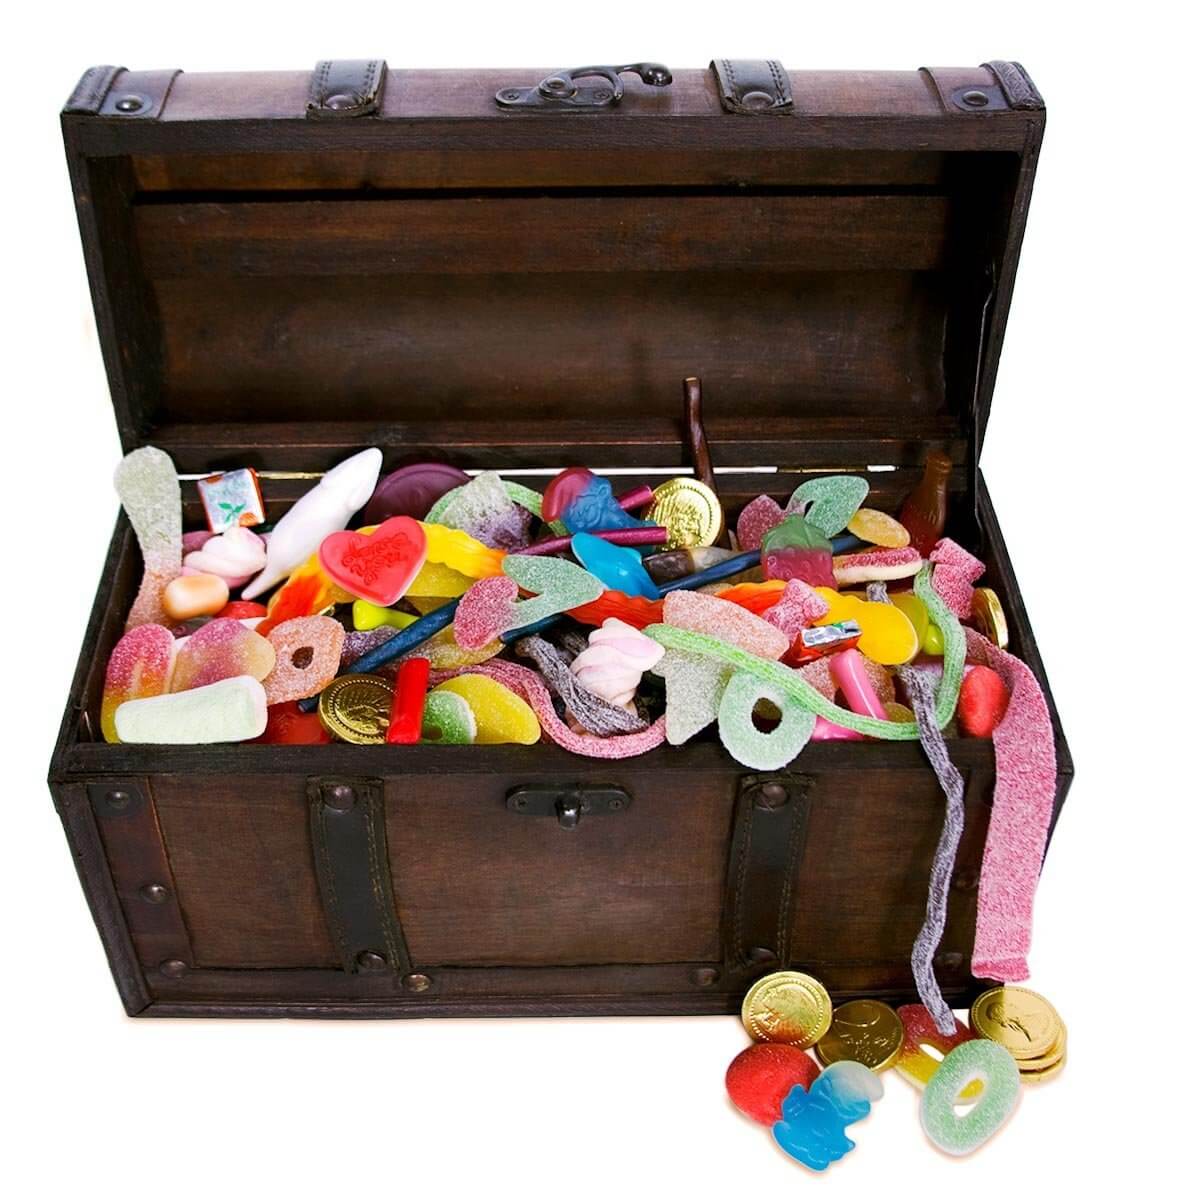 candy chest